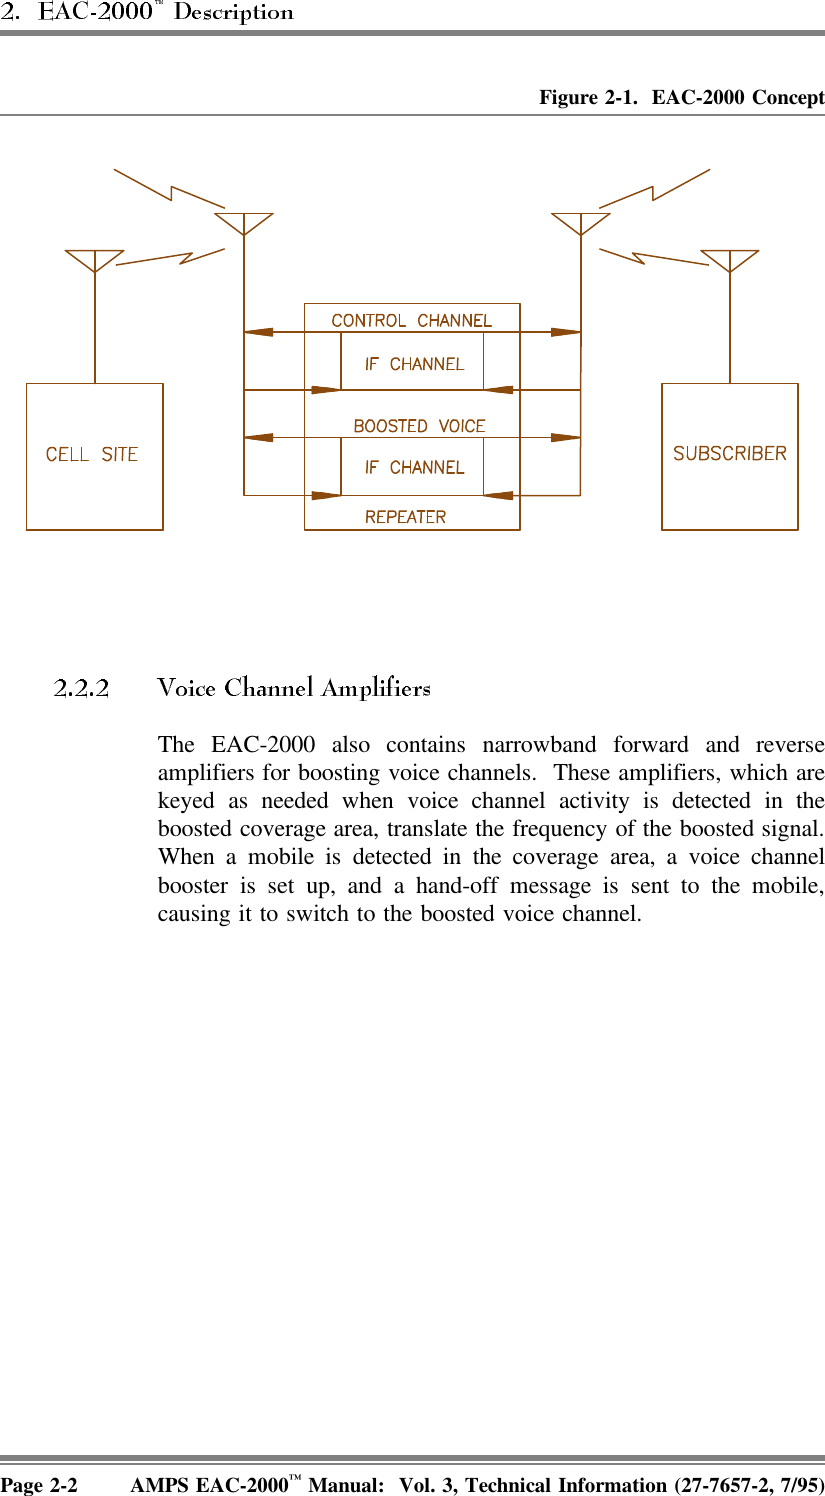 Figure 2-1.  EAC-2000 ConceptThe EAC-2000 also contains narrowband forward and reverseamplifiers for boosting voice channels.  These amplifiers, which arekeyed as needed when voice channel activity is detected in theboosted coverage area, translate the frequency of the boosted signal.When a mobile is detected in the coverage area, a voice channelbooster is set up, and a hand-off message is sent to the mobile,causing it to switch to the boosted voice channel.Page 2-2 AMPS EAC-2000™ Manual:  Vol. 3, Technical Information (27-7657-2, 7/95)